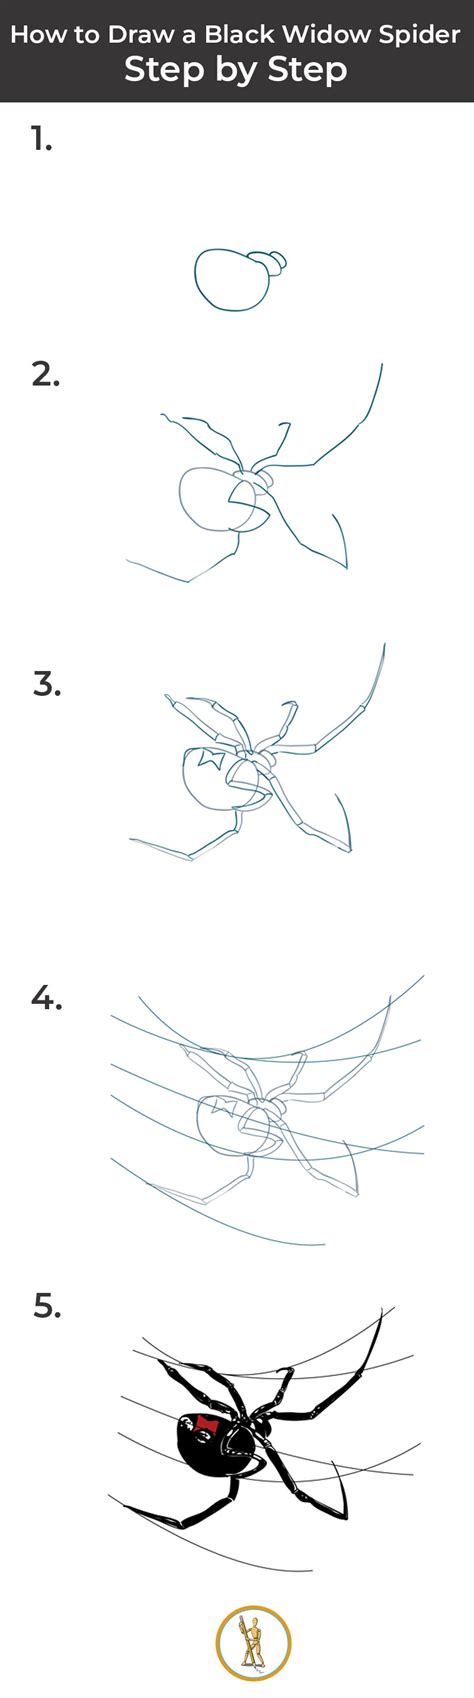 How To Draw A Black Widow Spider Step By Step